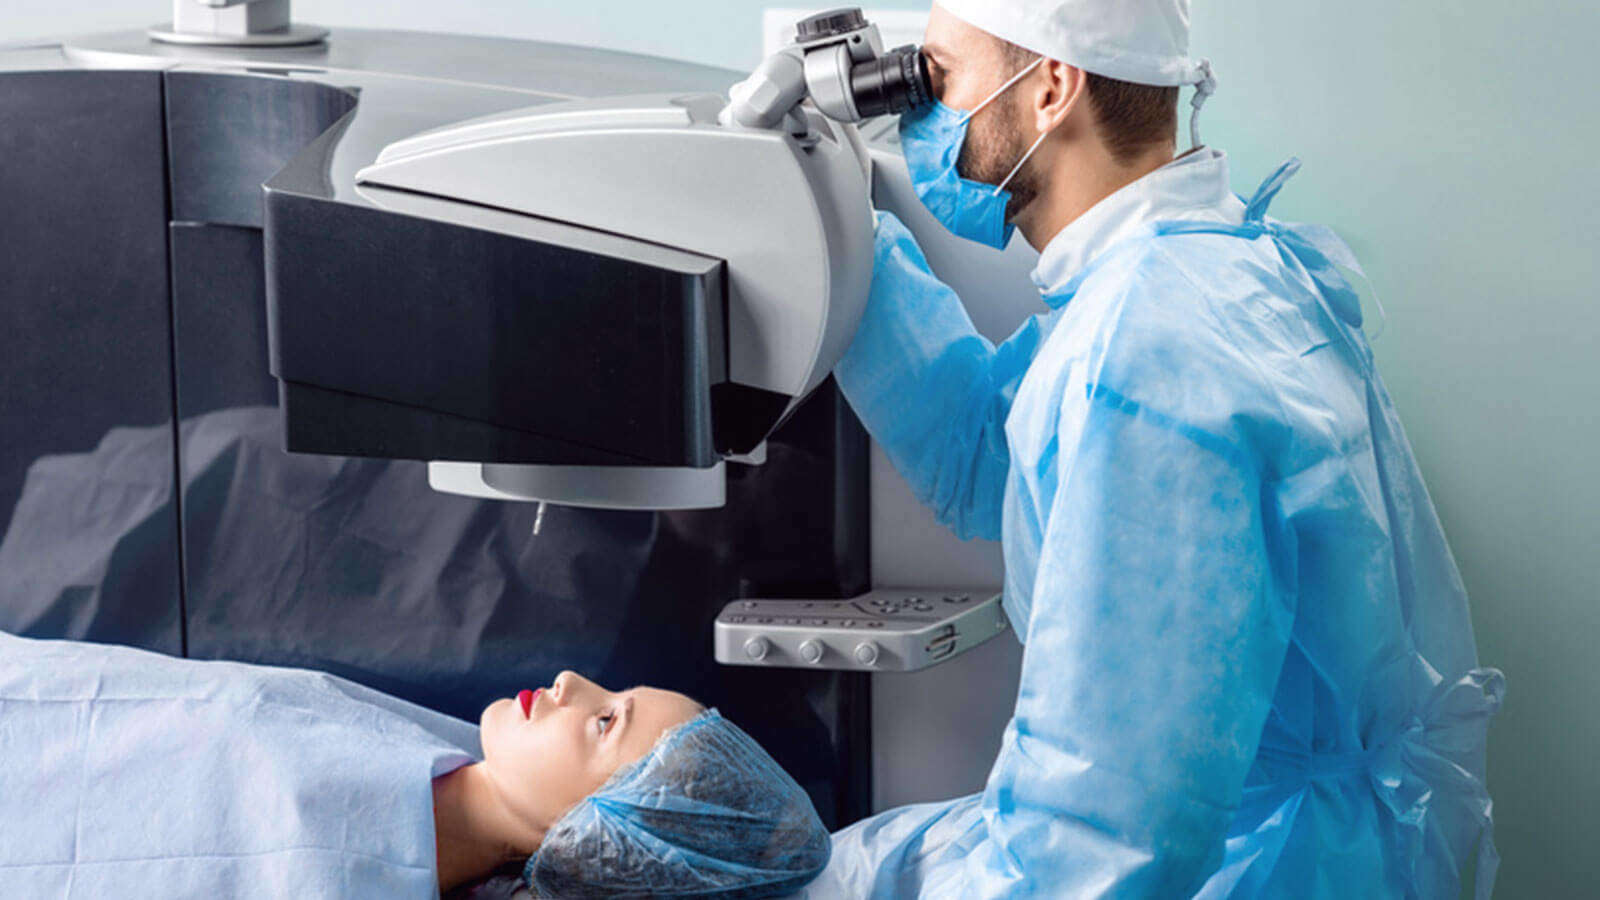 What is Lasik surgery